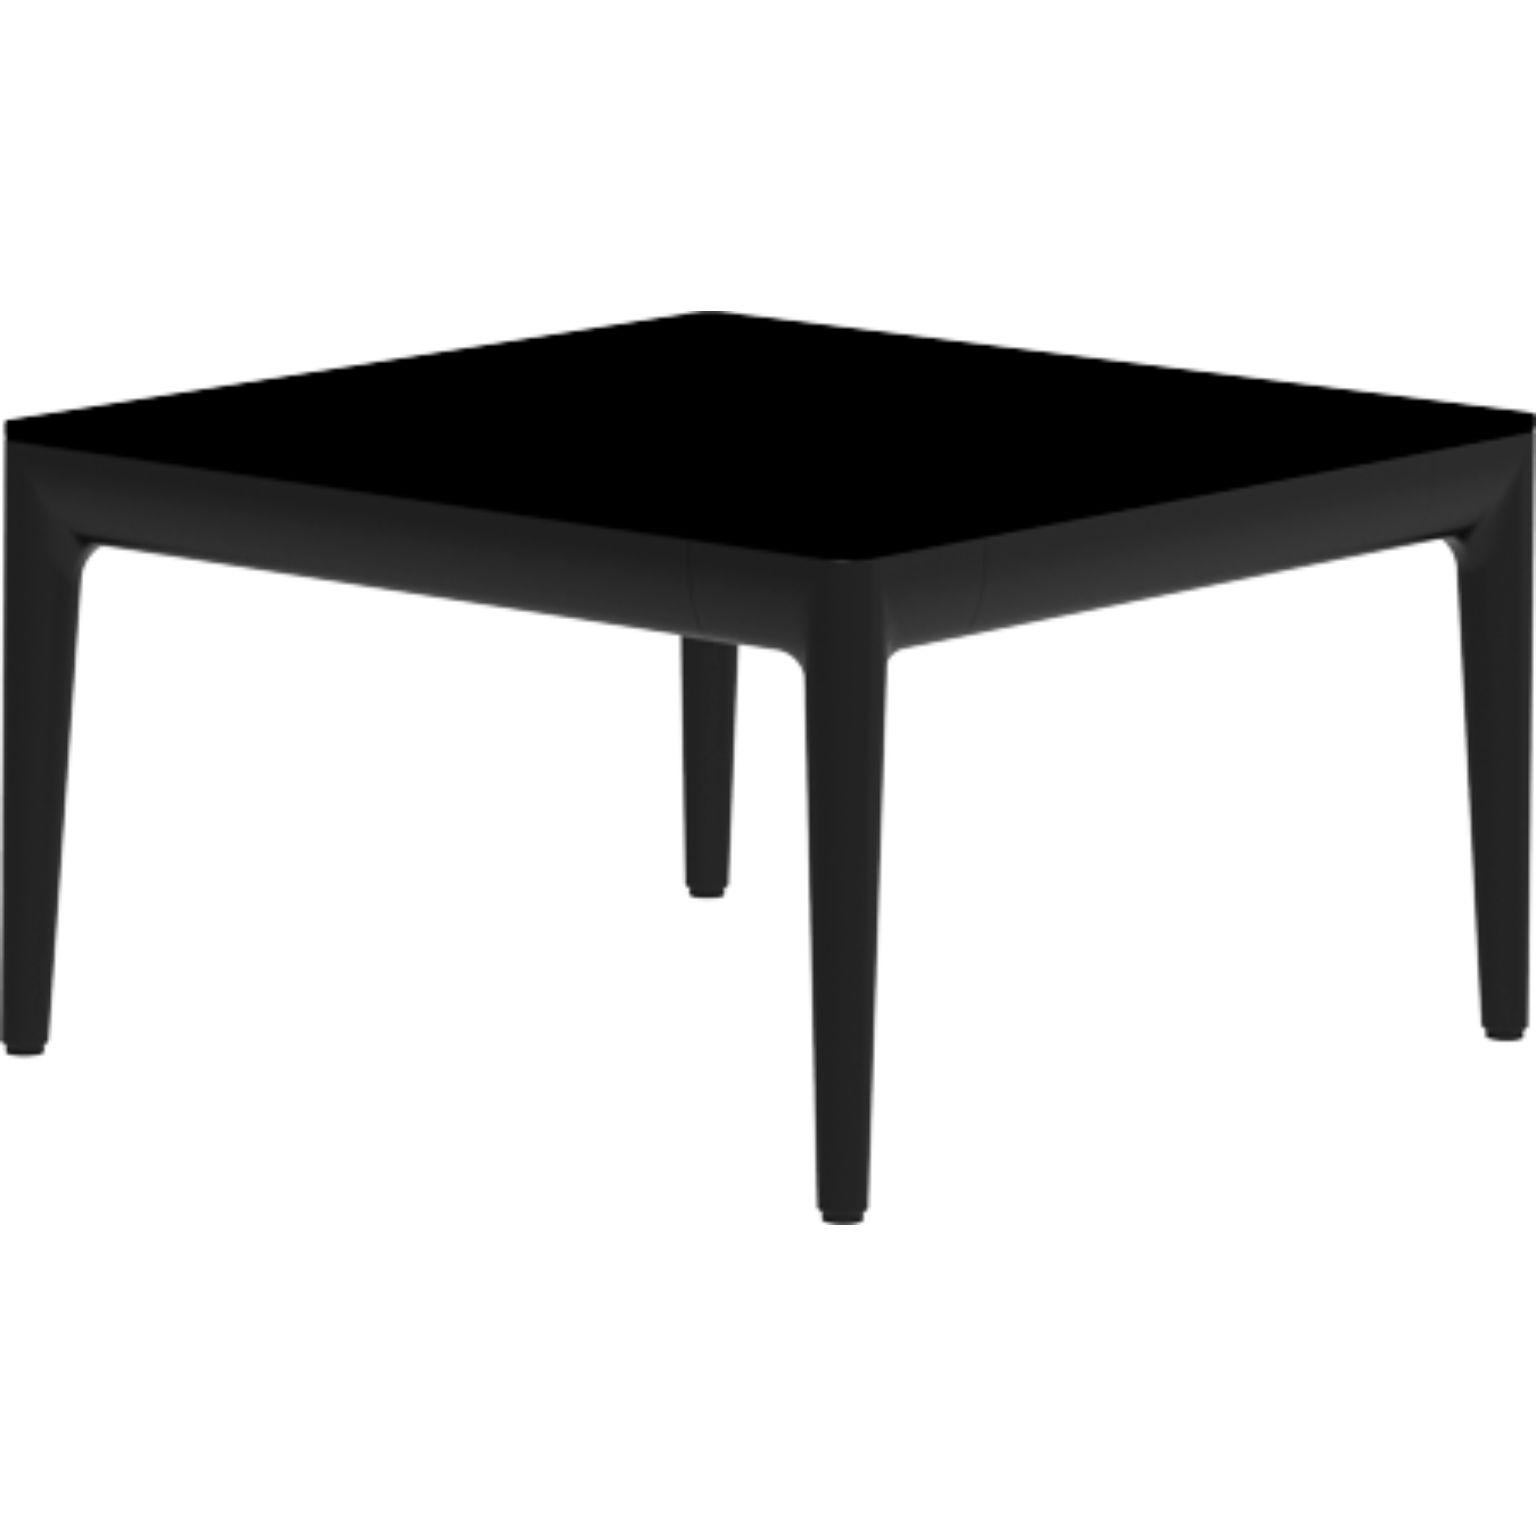 Ribbons Black 50 Coffee Table by MOWEE.
Dimensions: D 50 x W 50 x H 29 cm.
Material: Aluminum and HPL top.
Weight: 8 kg.
Also available in different colors and finishes. (HPL Black Edge or Neolith top).

An unmistakable collection for its